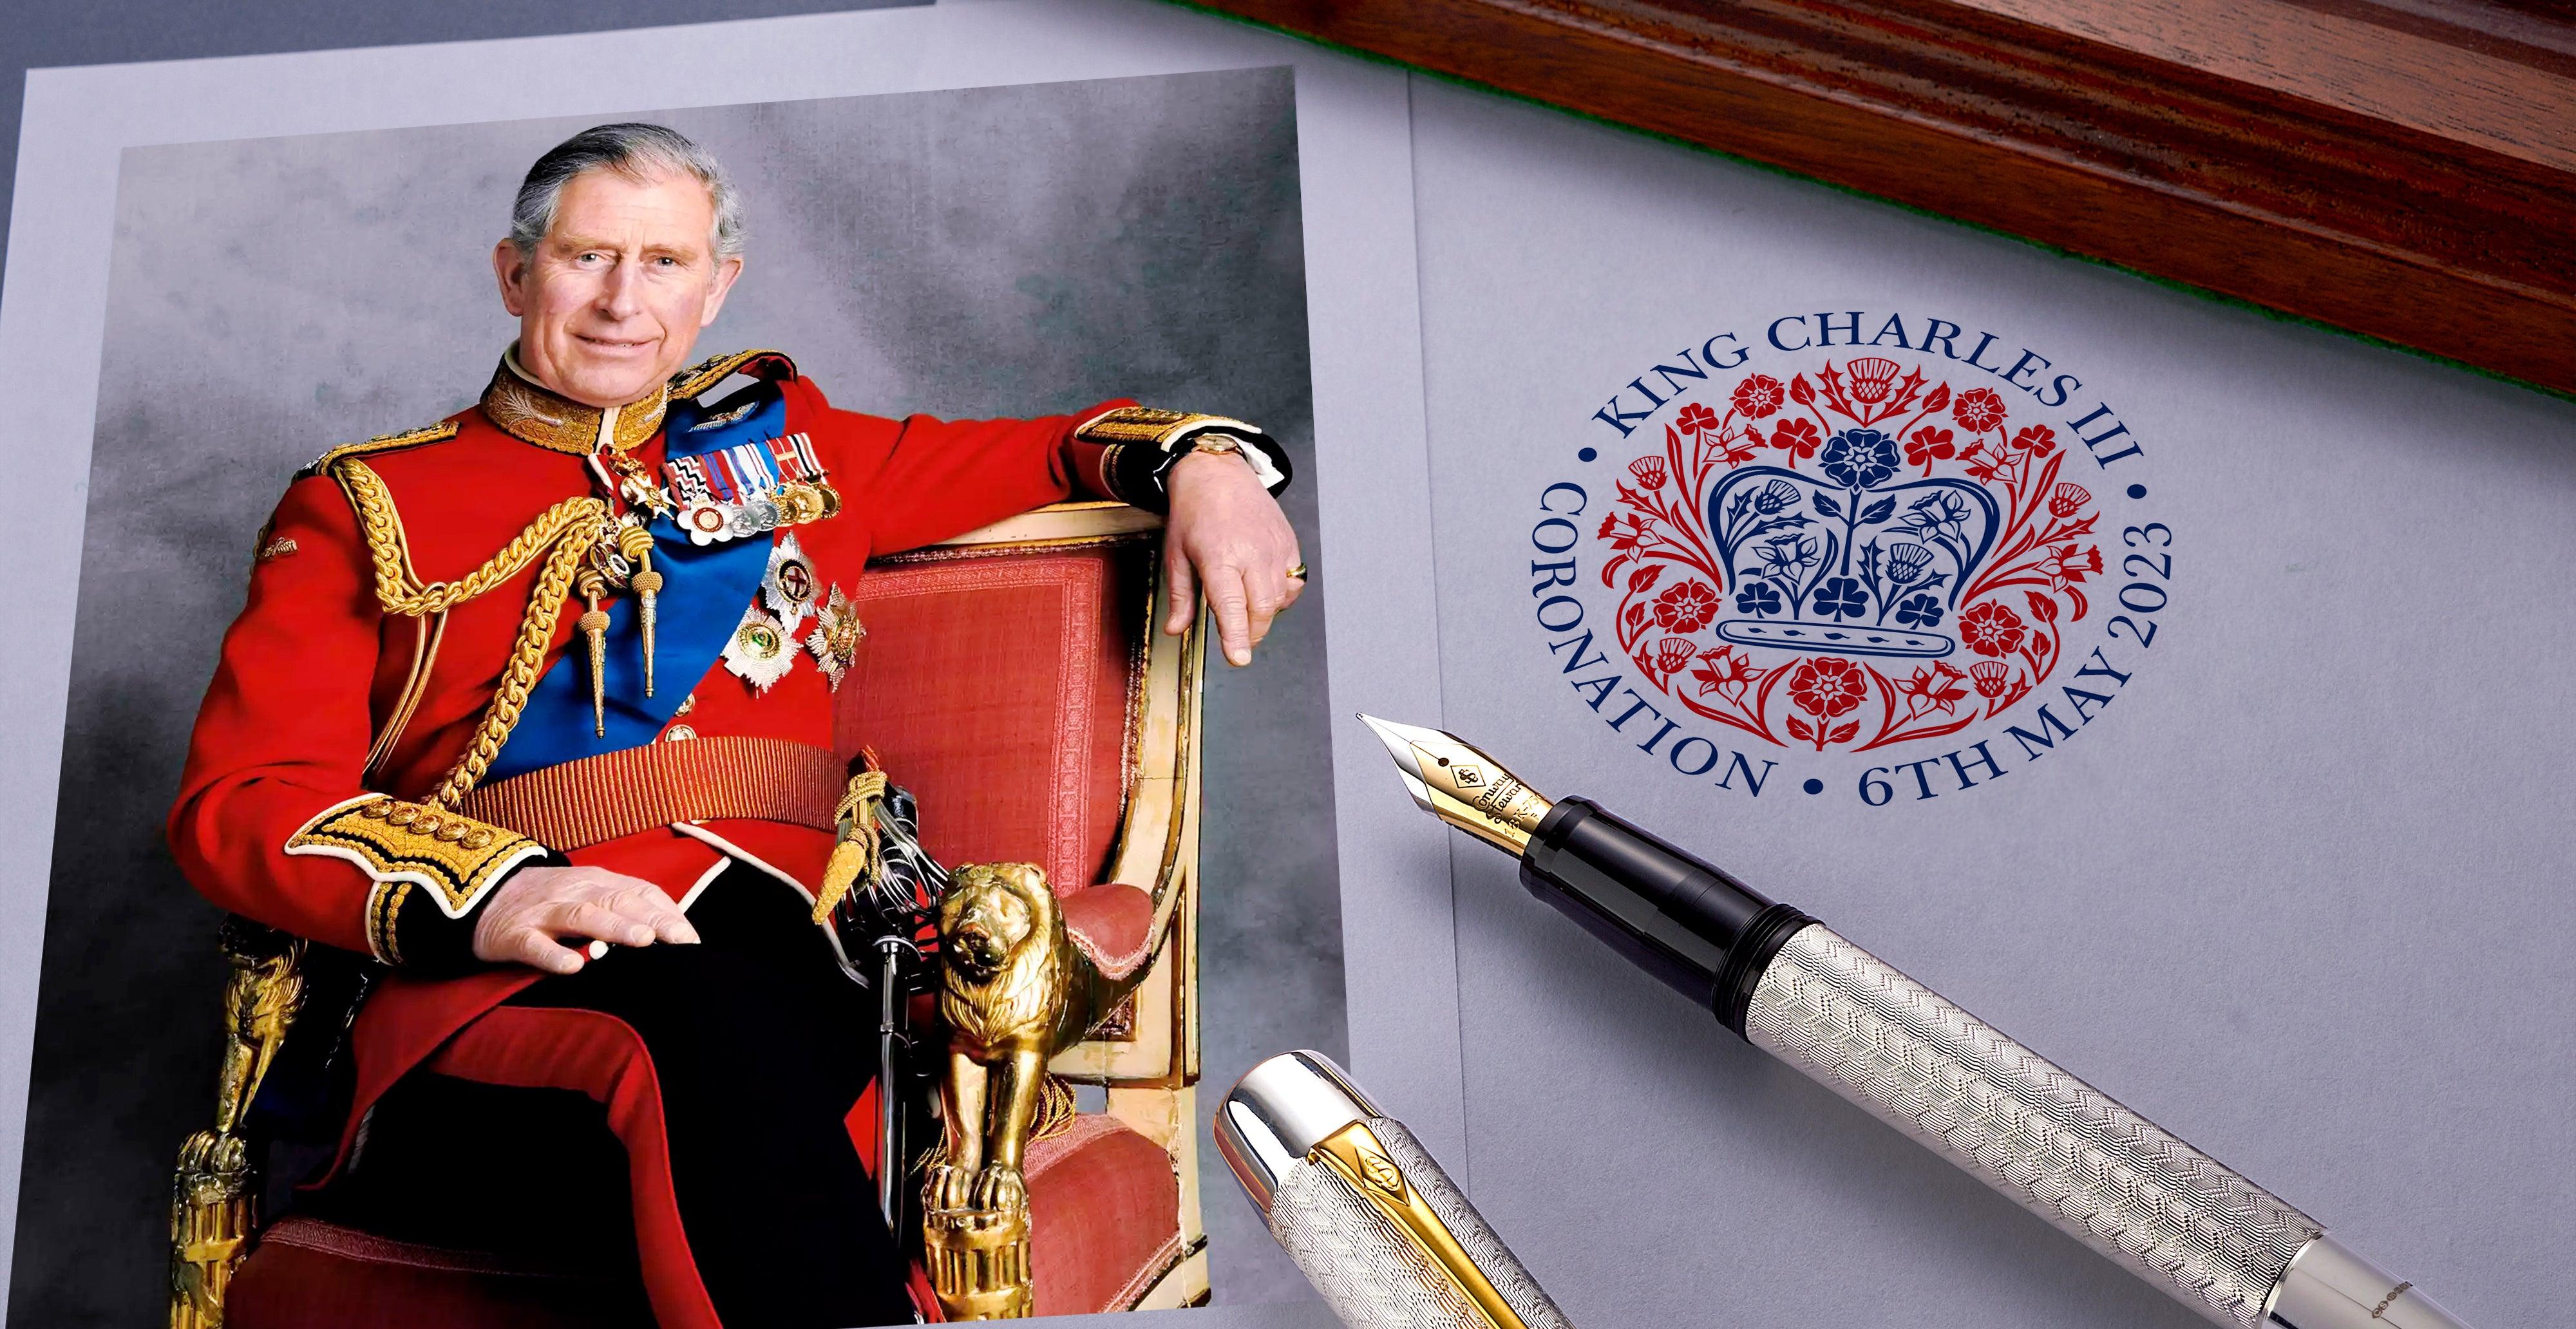 A Royal Tribute: Introducing the King Charles III Coronation 2023 Sterling Silver Pen conwaystewart.com